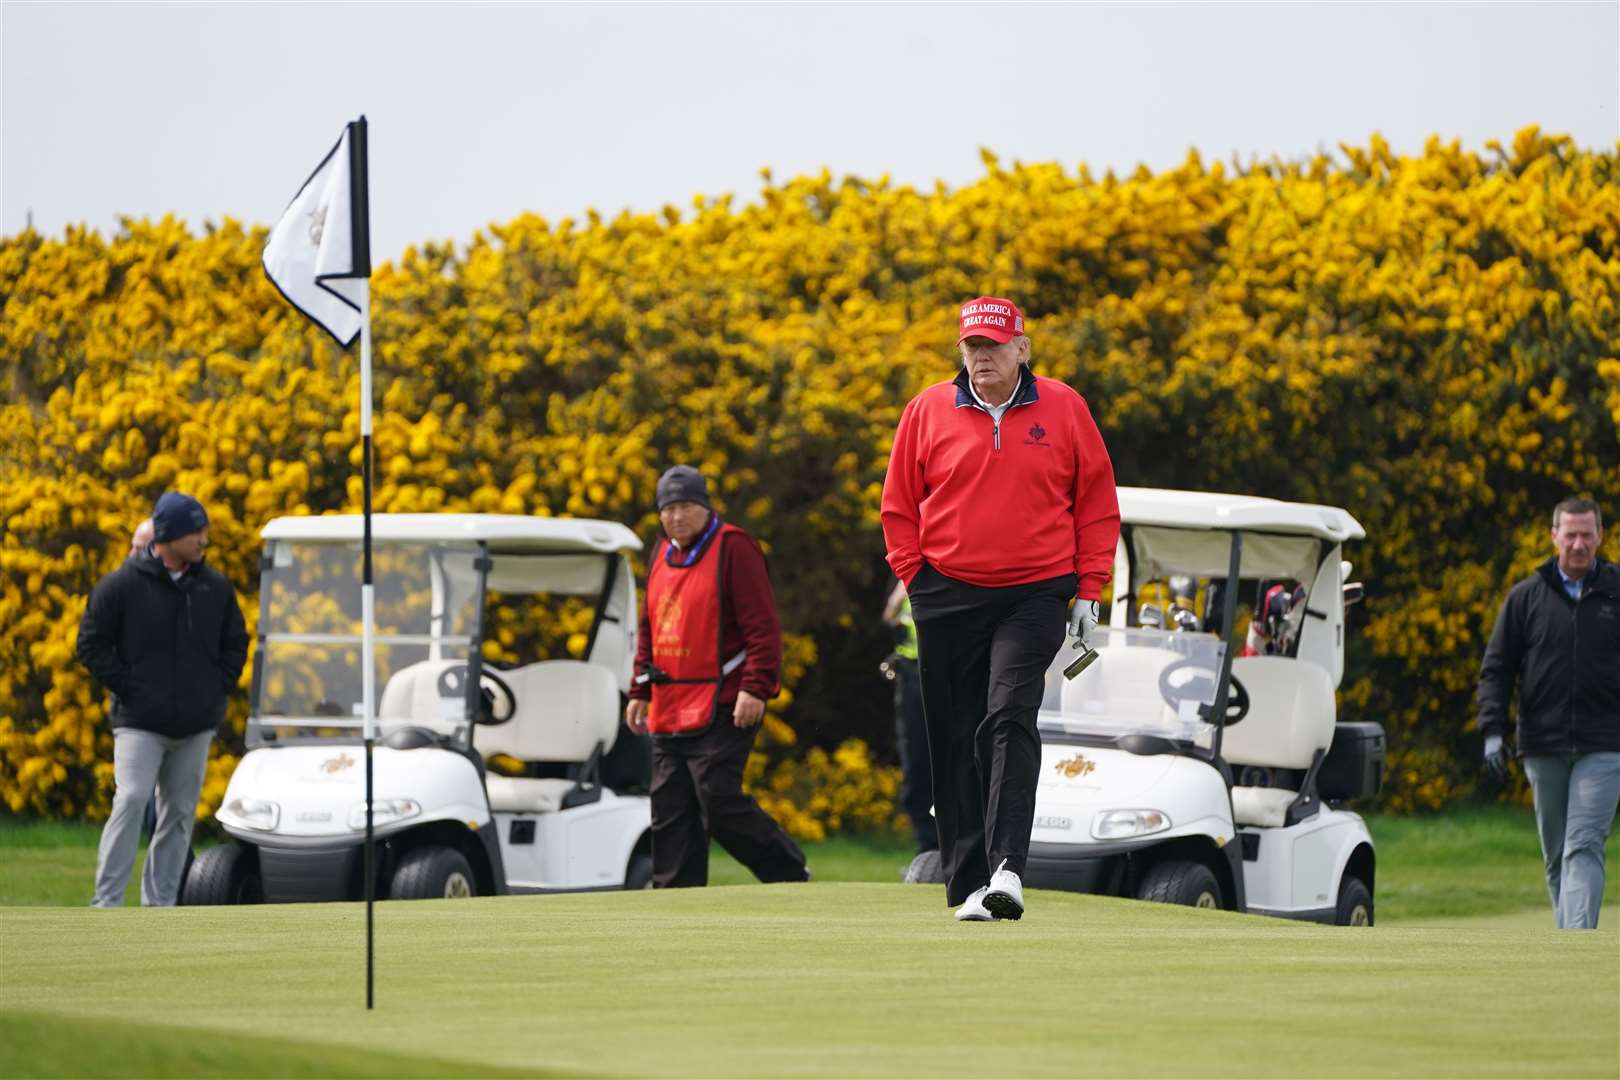 Mr Trump wants to see the Open once again staged at Turnberry (Andrew Milligan/PA)